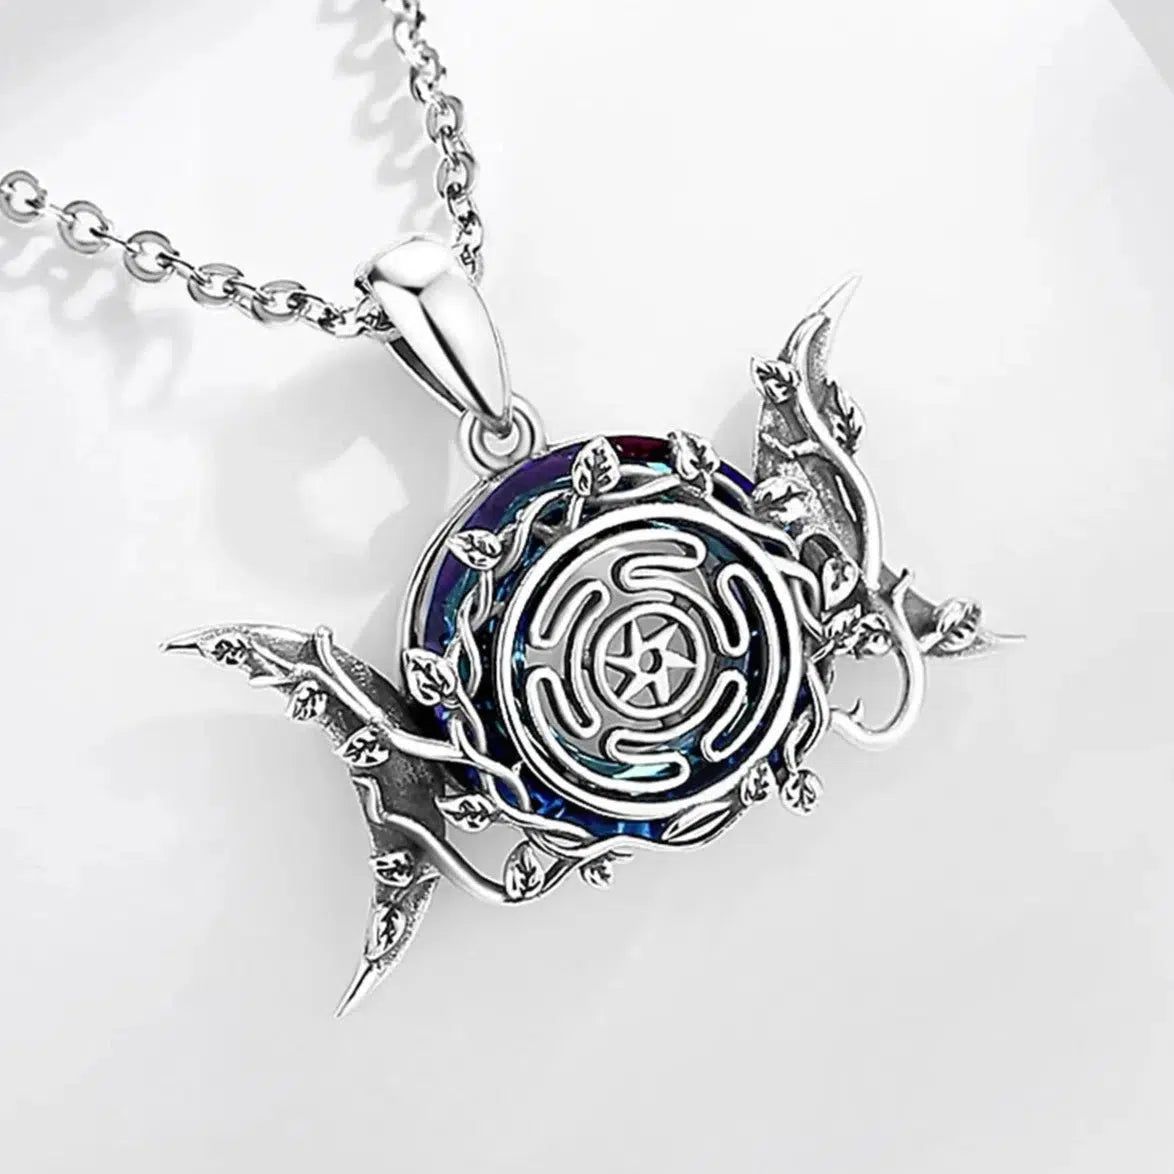 Hecate Wheel Wicca Pagan Necklace Triple Moon Goddess Necklace Witch Jewelry-MoonChildWorld